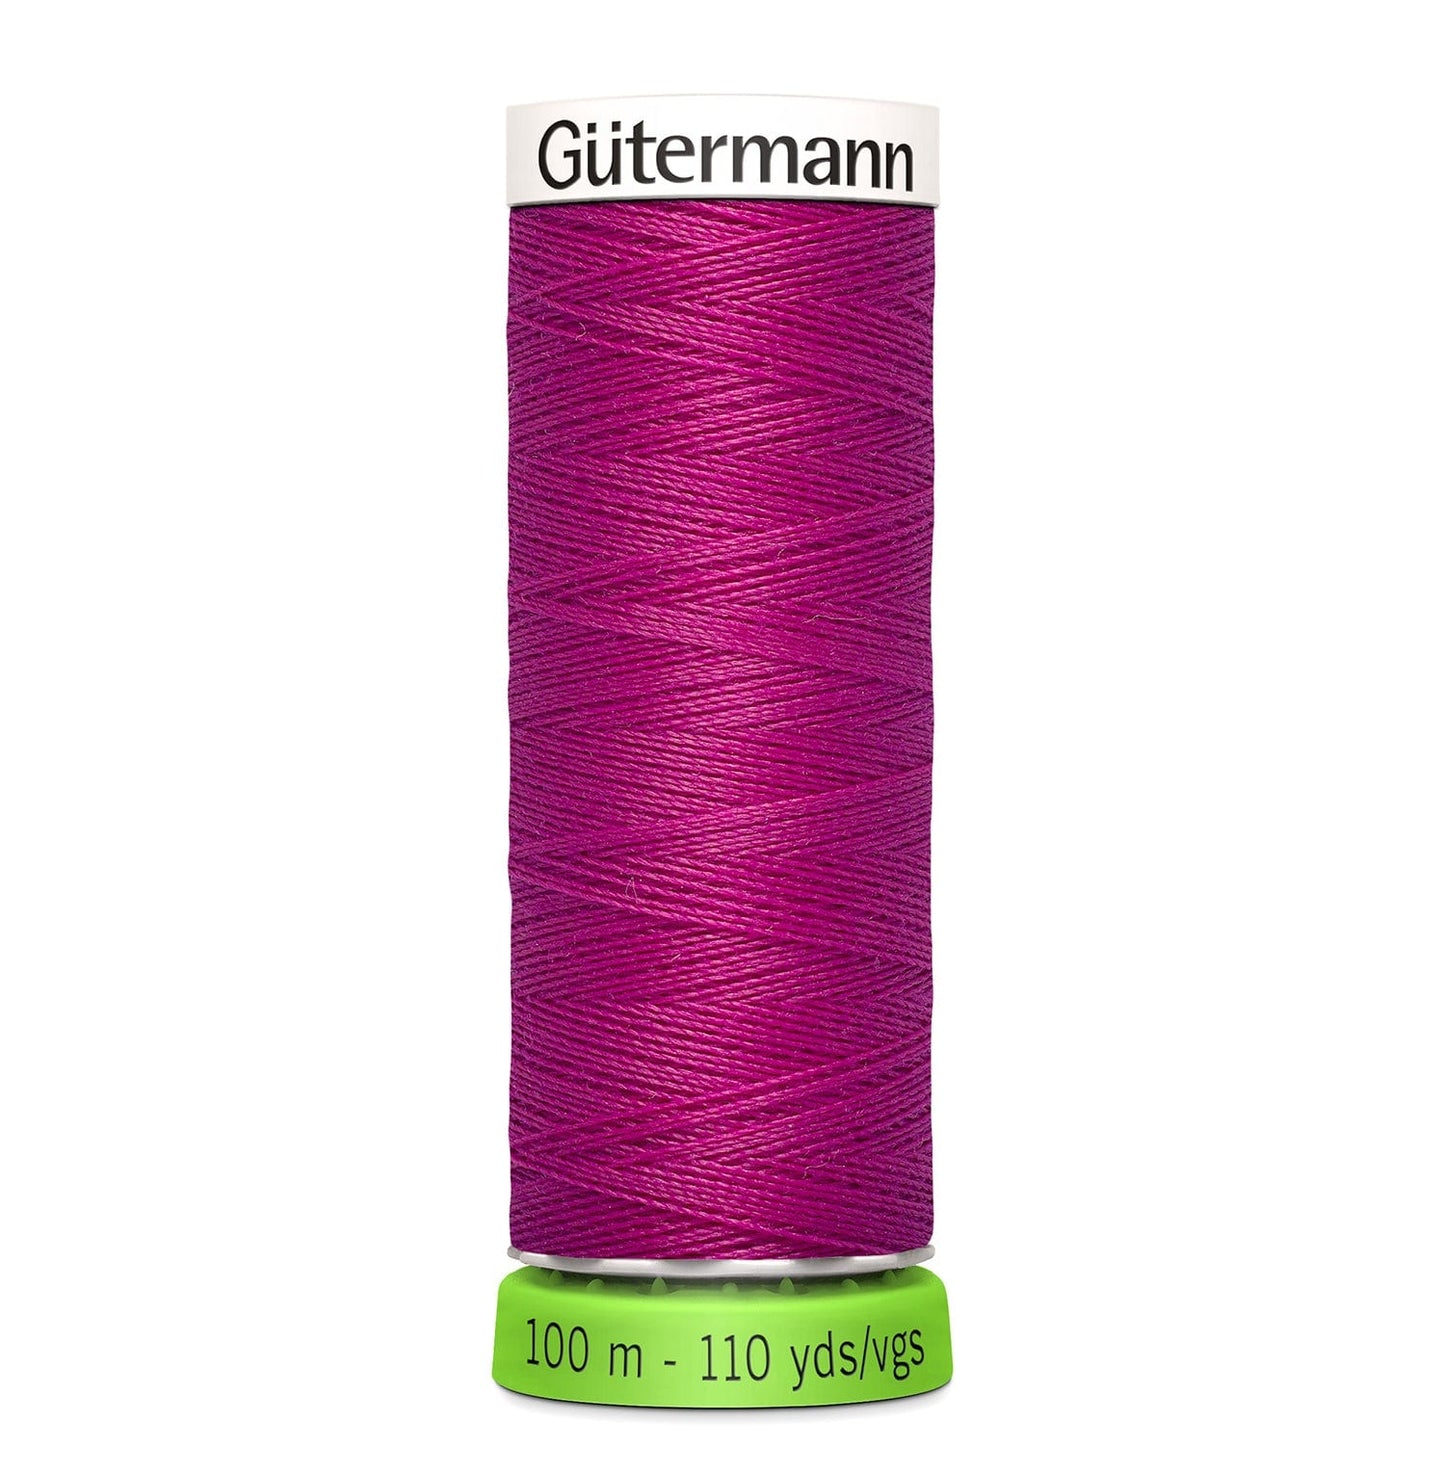 100 m Reel Gütermann Recycled Sew-All Thread in Hot Magenta, no. 877